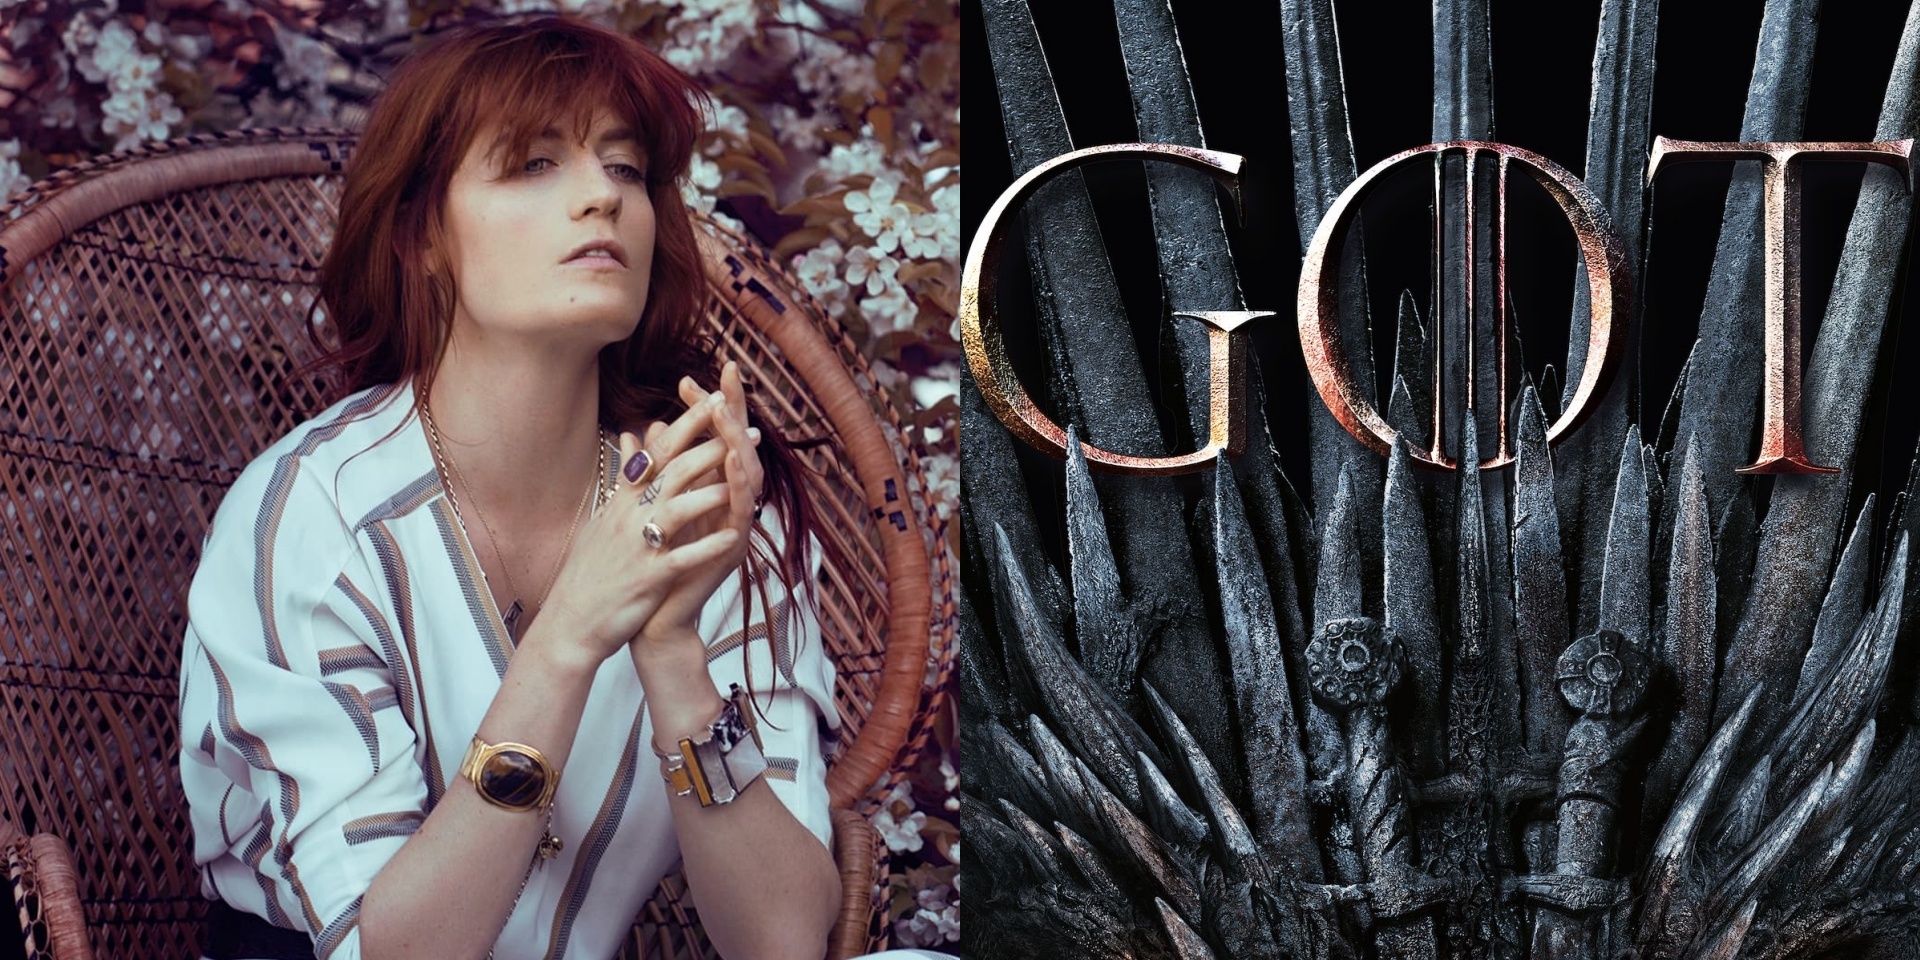 florence-and-the-machine-game-of-thrones-new-song-jenny-of-oldstones